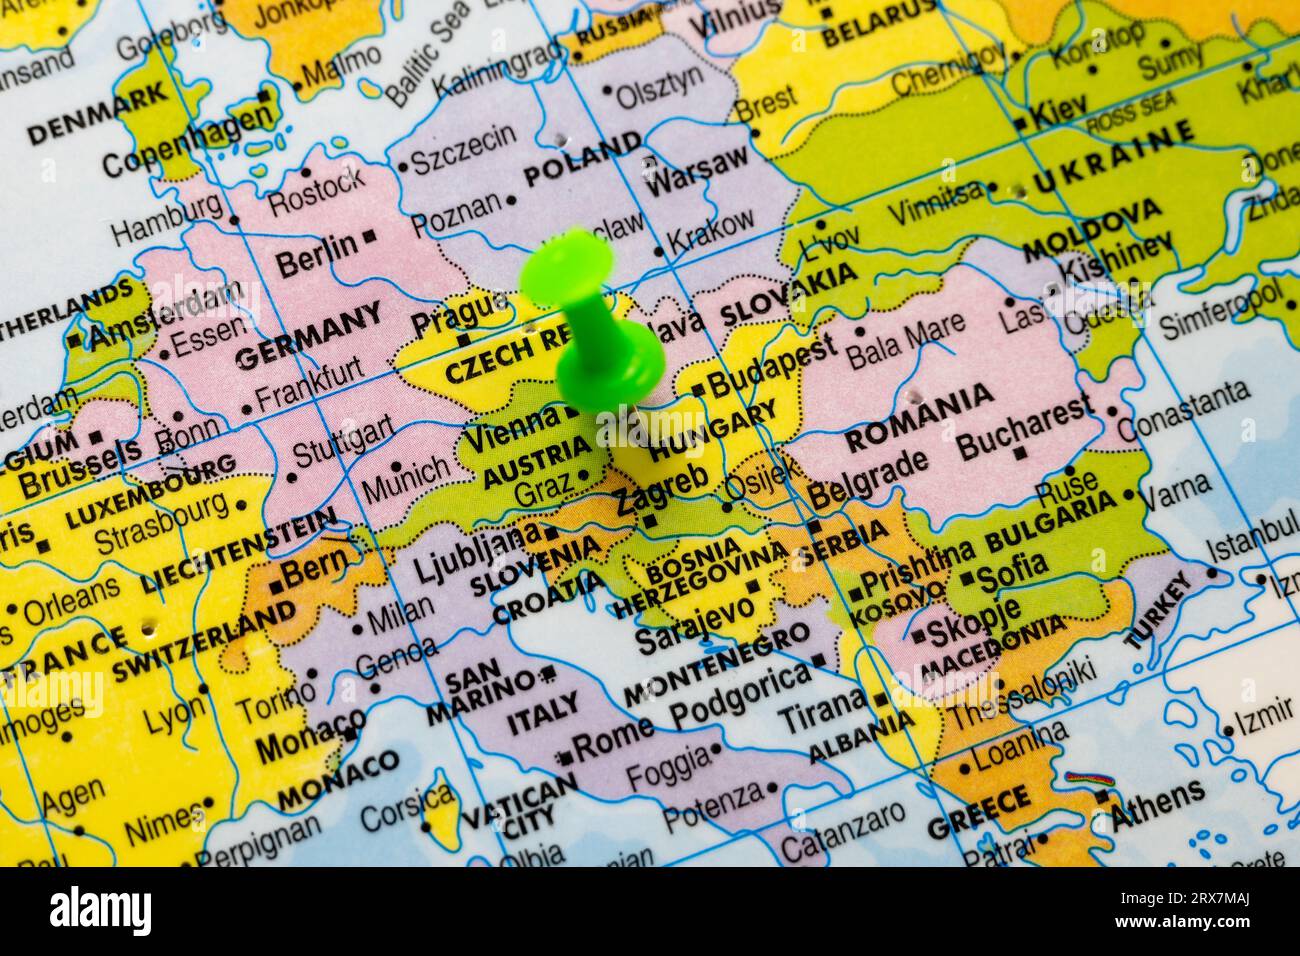 This stock image shows the location of Hungary on a political map of Europe Stock Photo